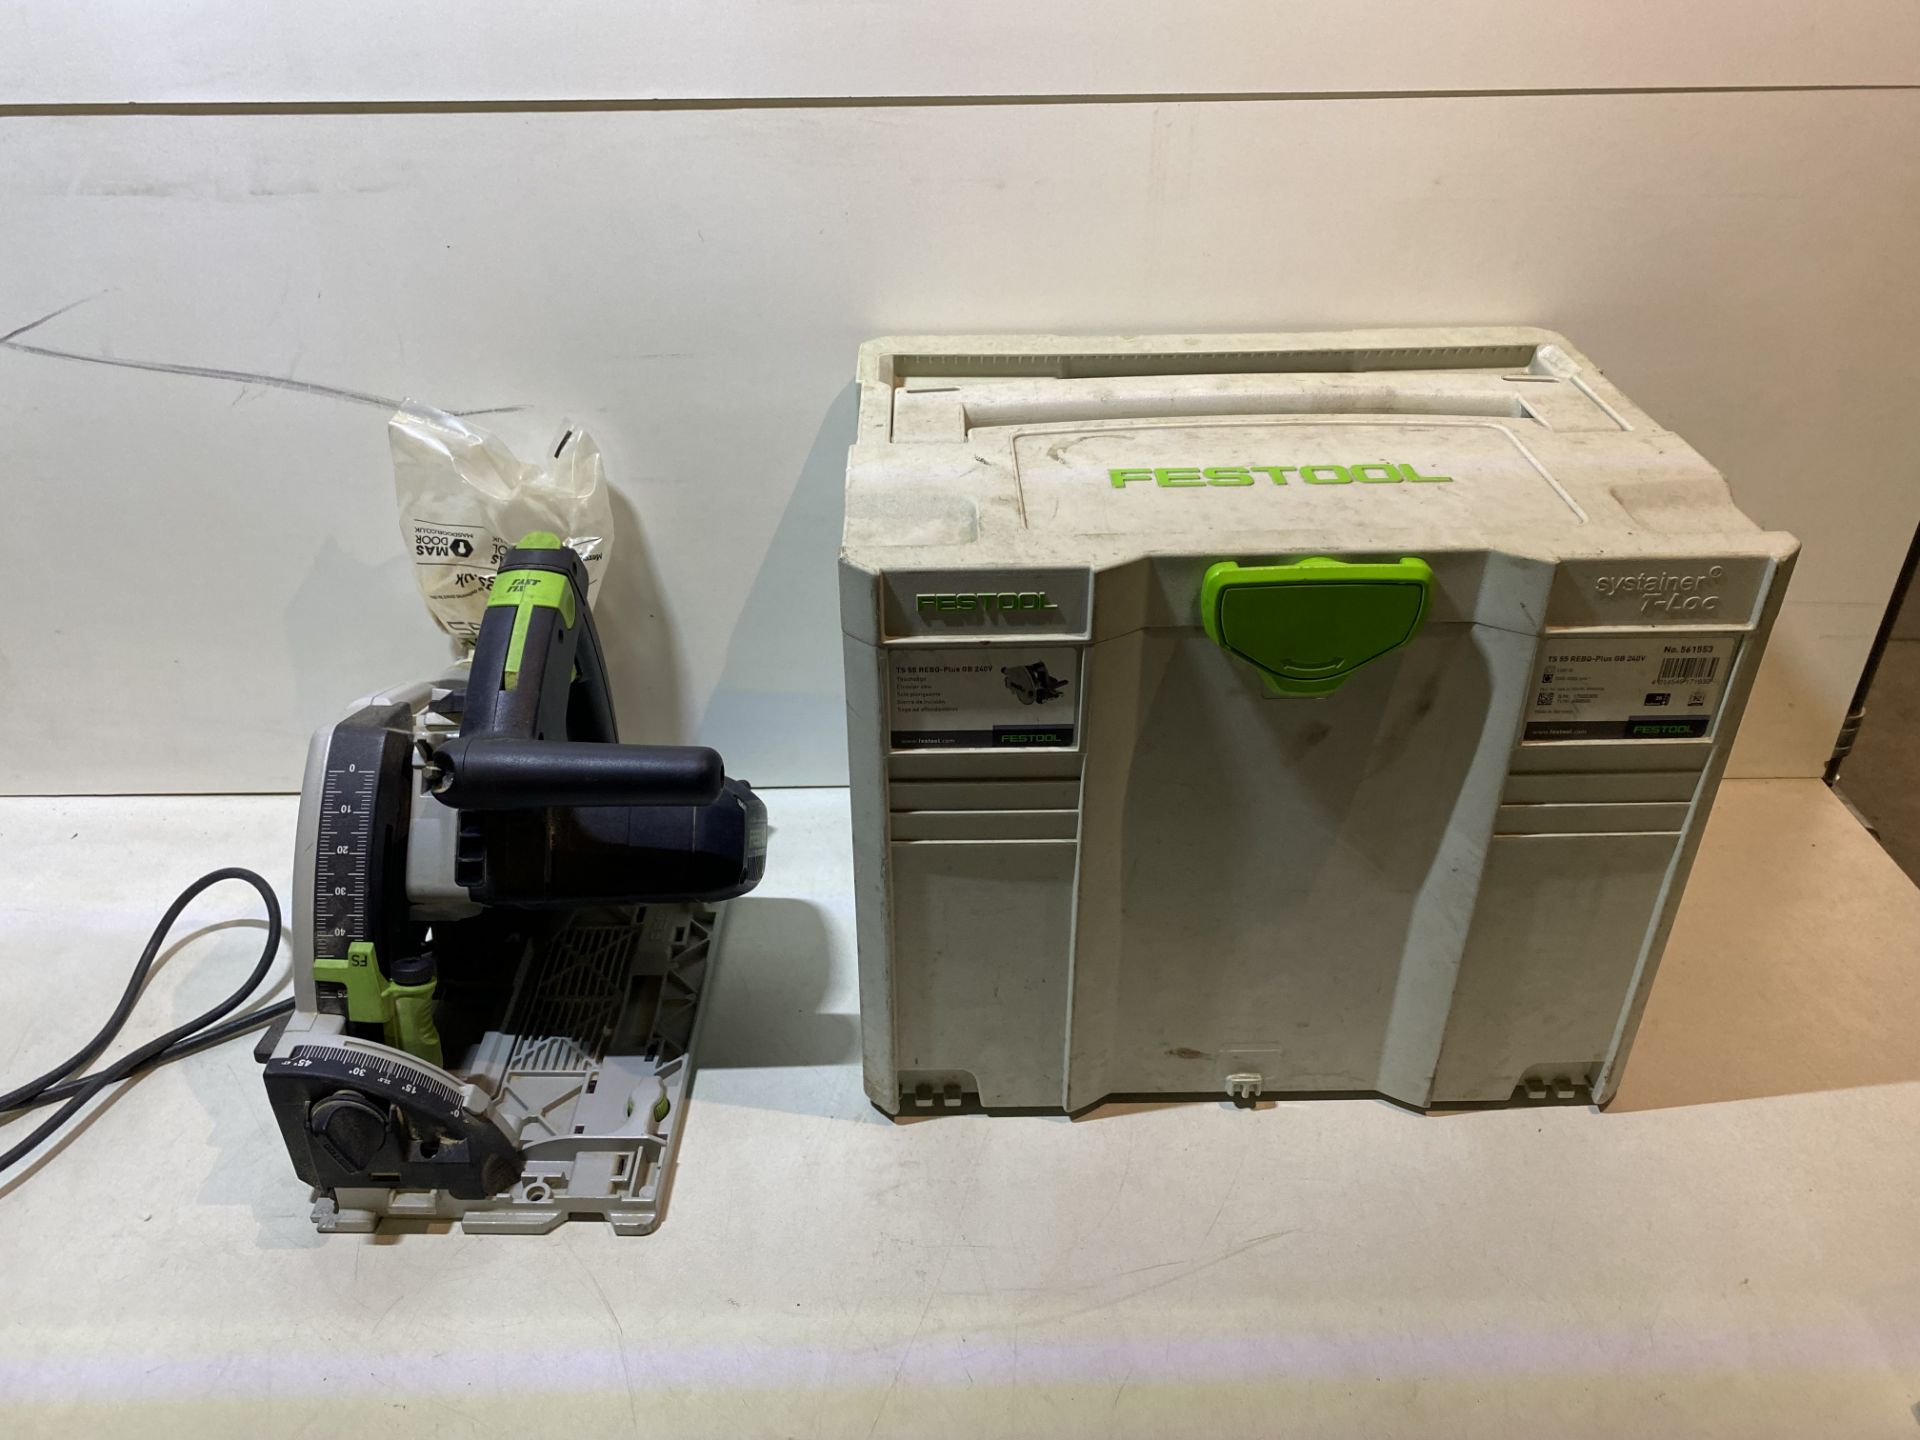 USED 561553 CIRCULAR PLUNGE SAW TS 55 REBQ-PLUS GB 240V - Missing Additional Parts - SEE PICTURES